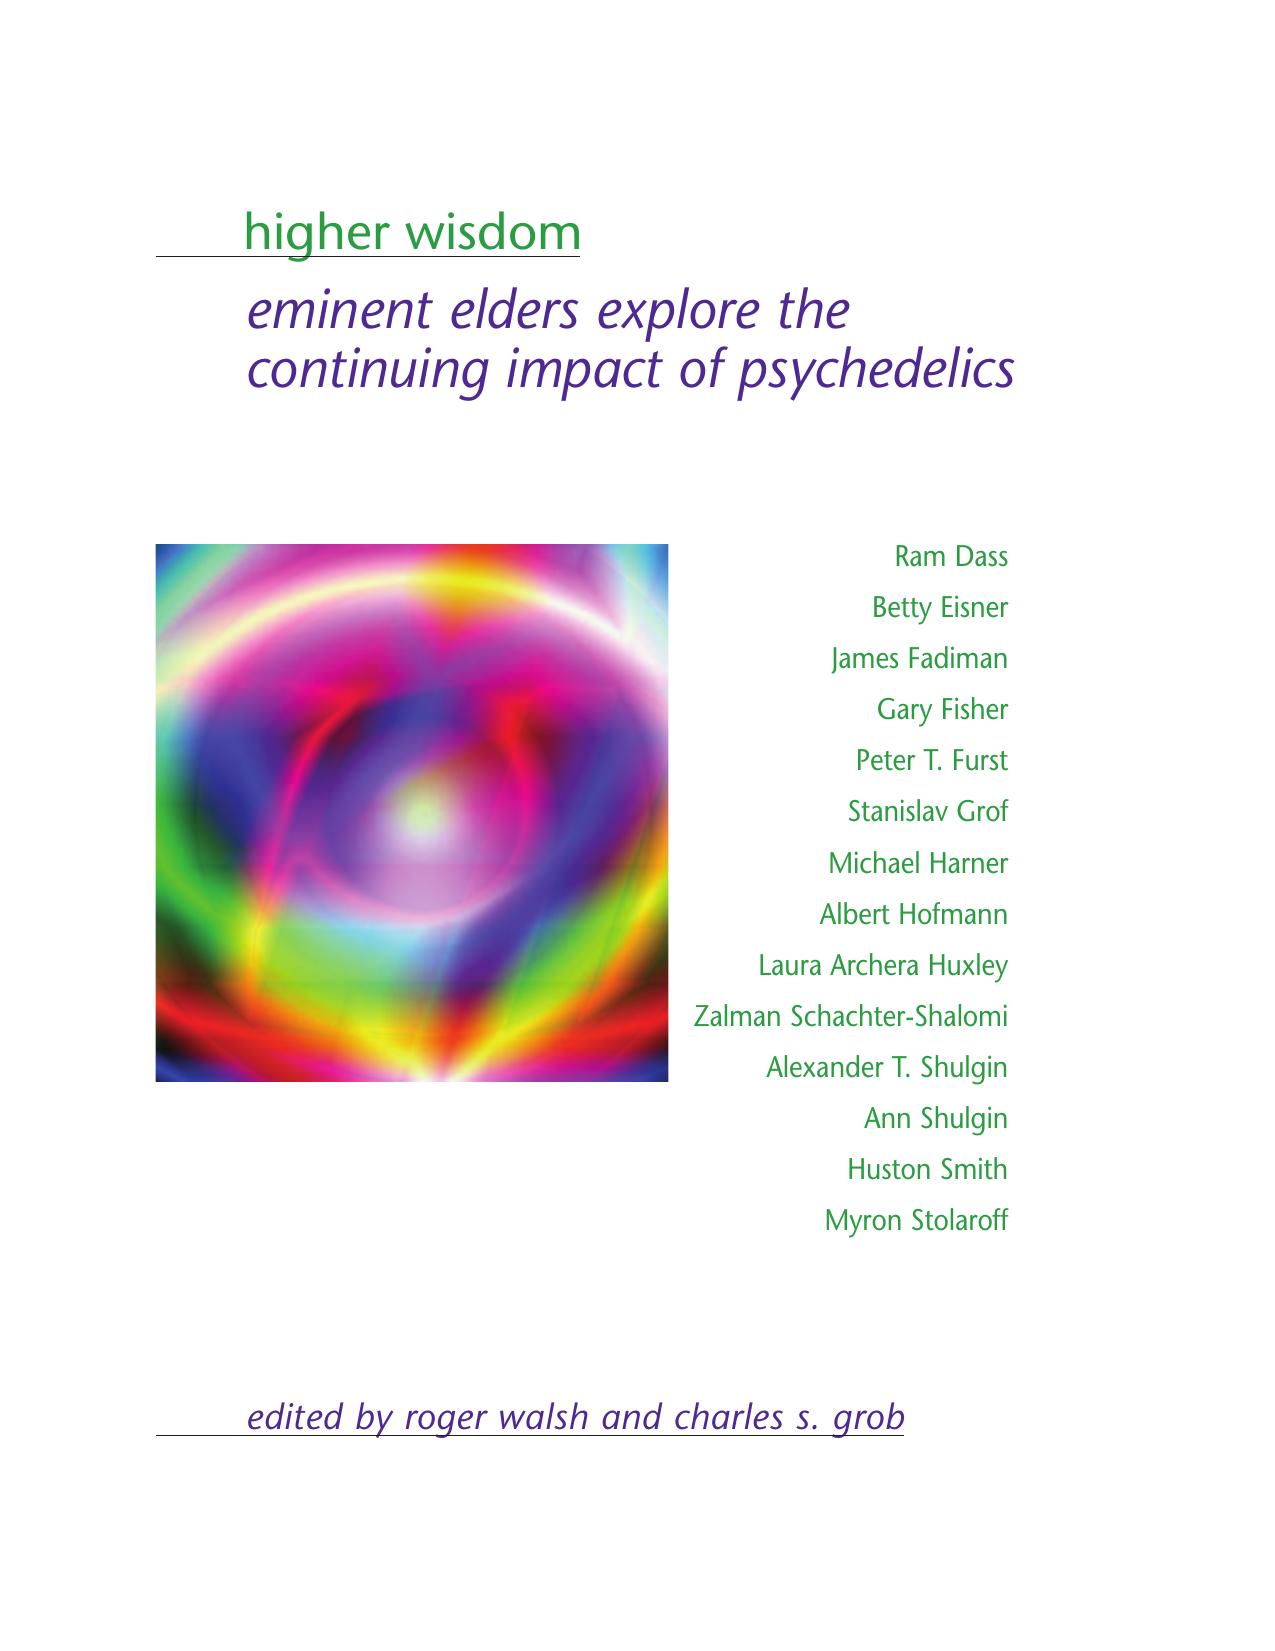 Higher Wisdom: Eminent Elders Explore the Continuing Impact of Psychedelics